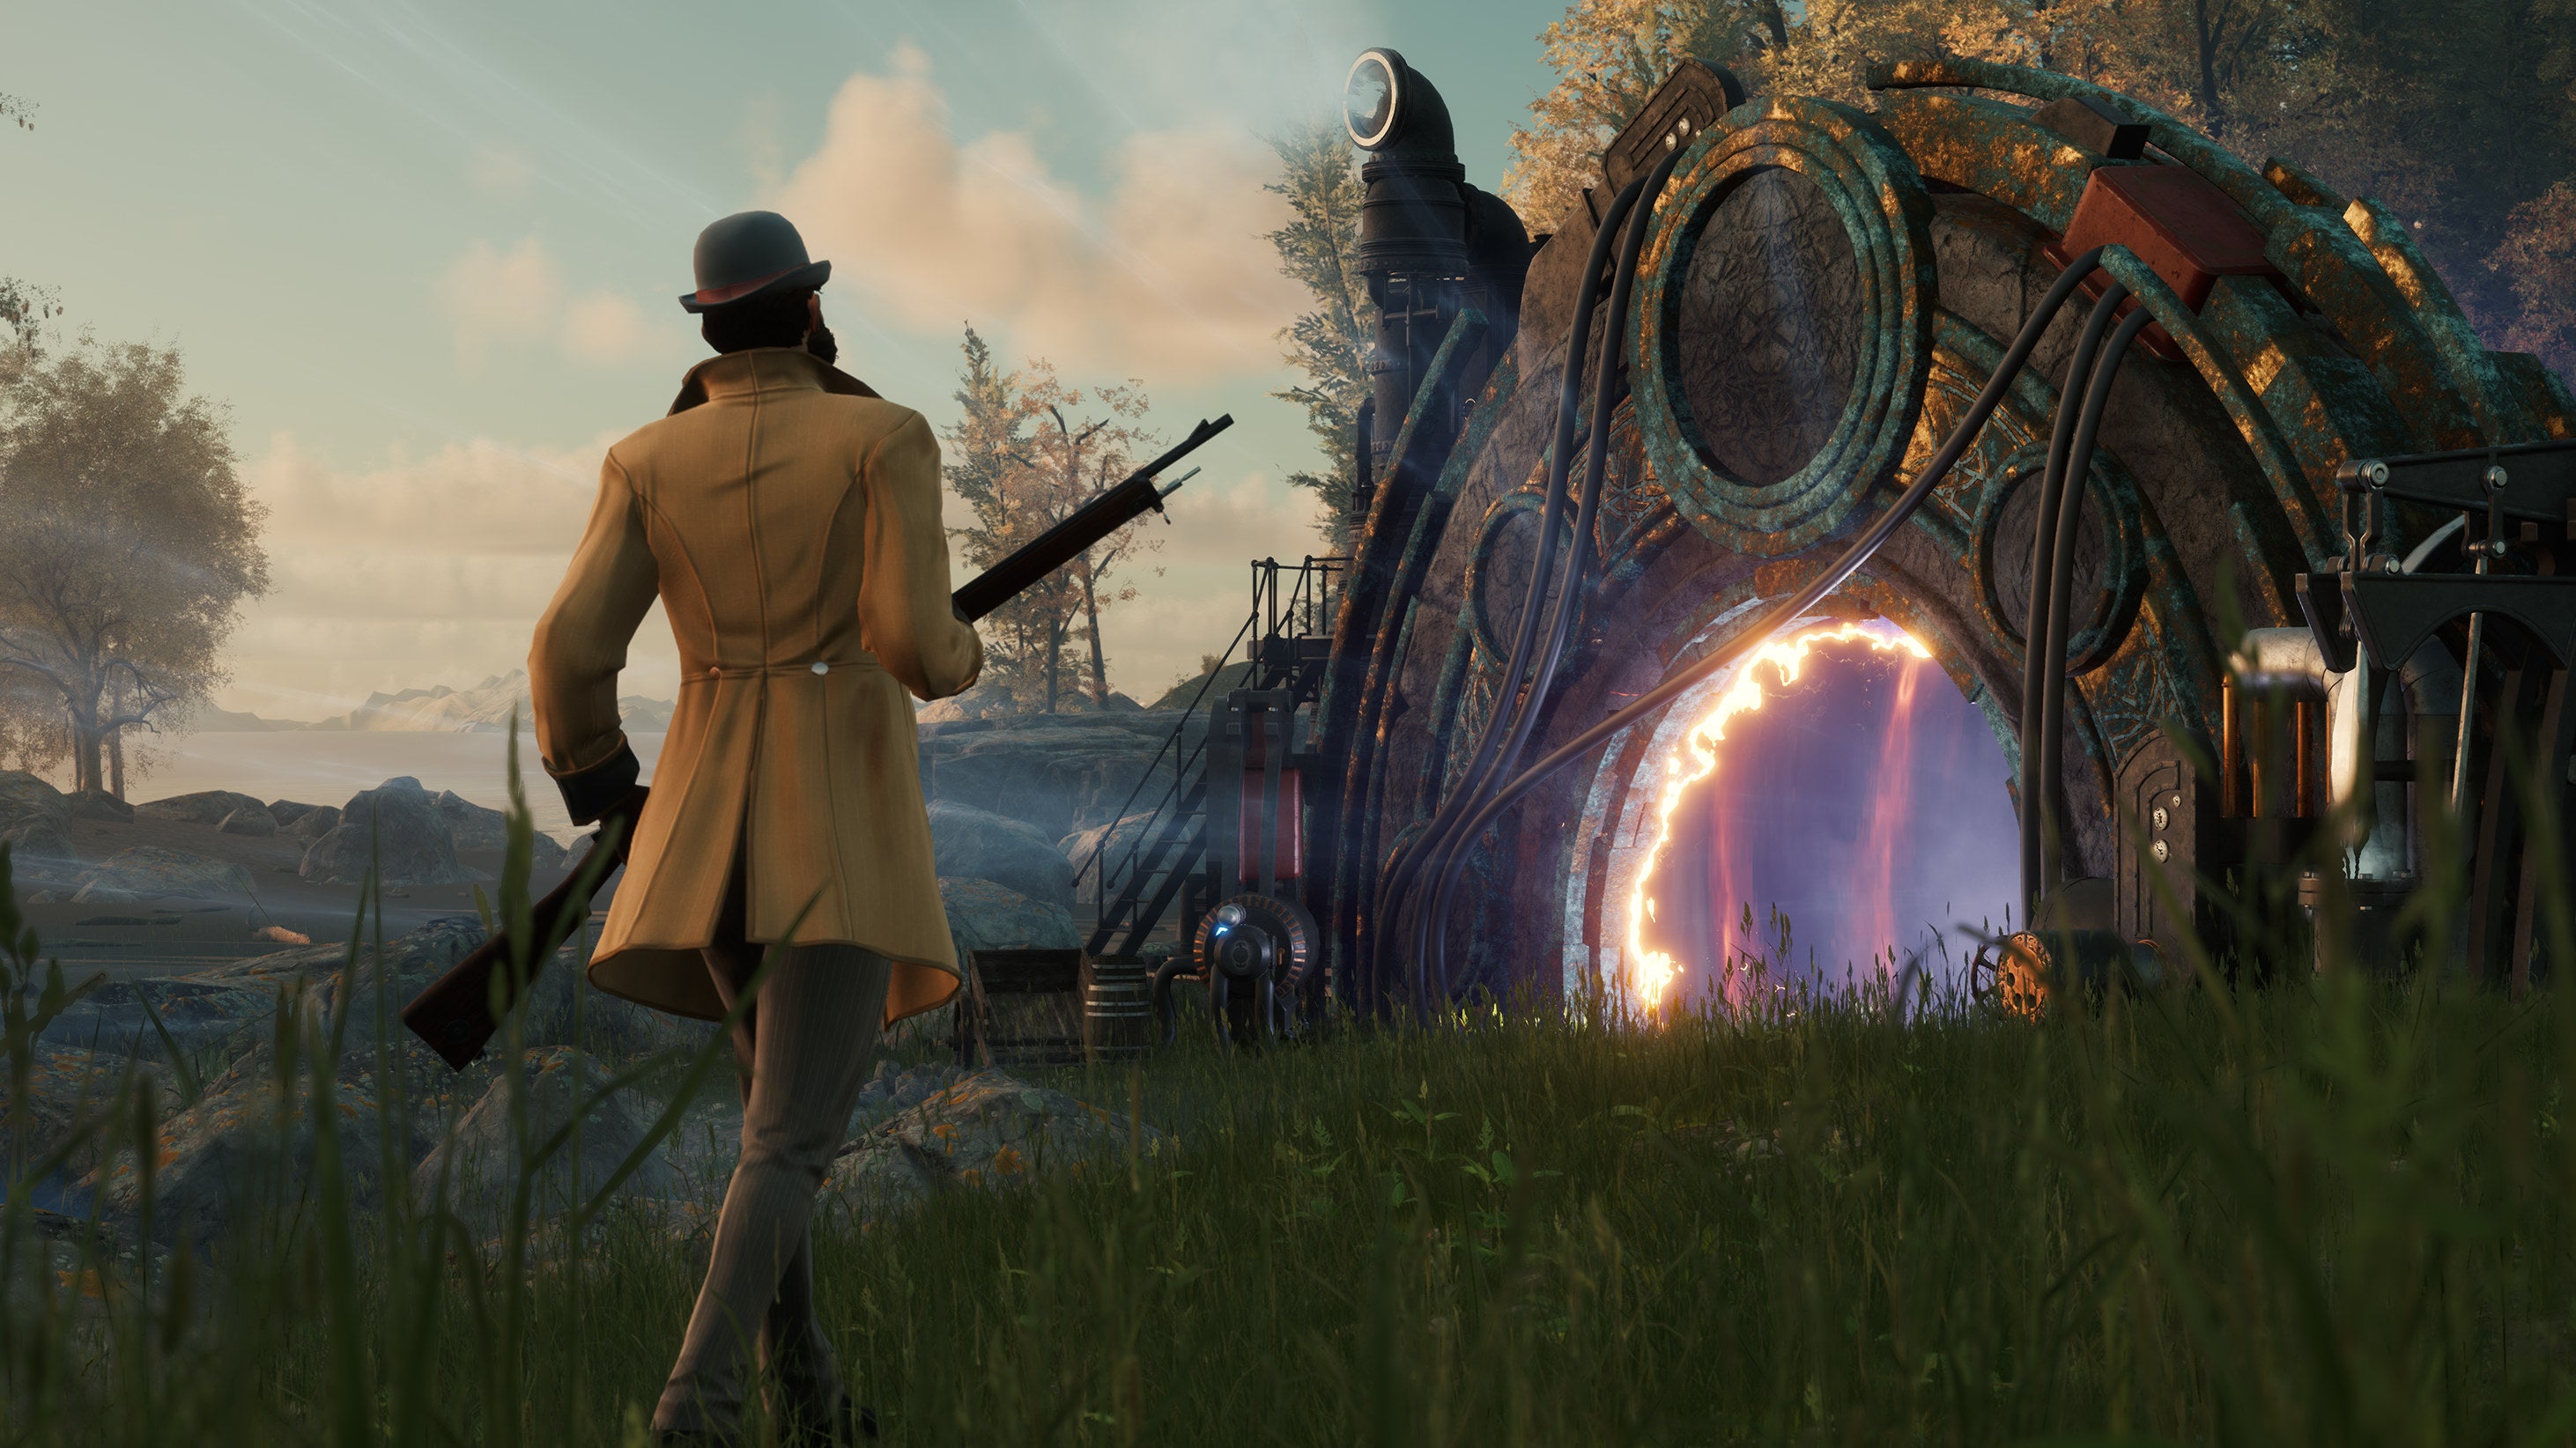 The new frontier in a Nightingale screenshot.